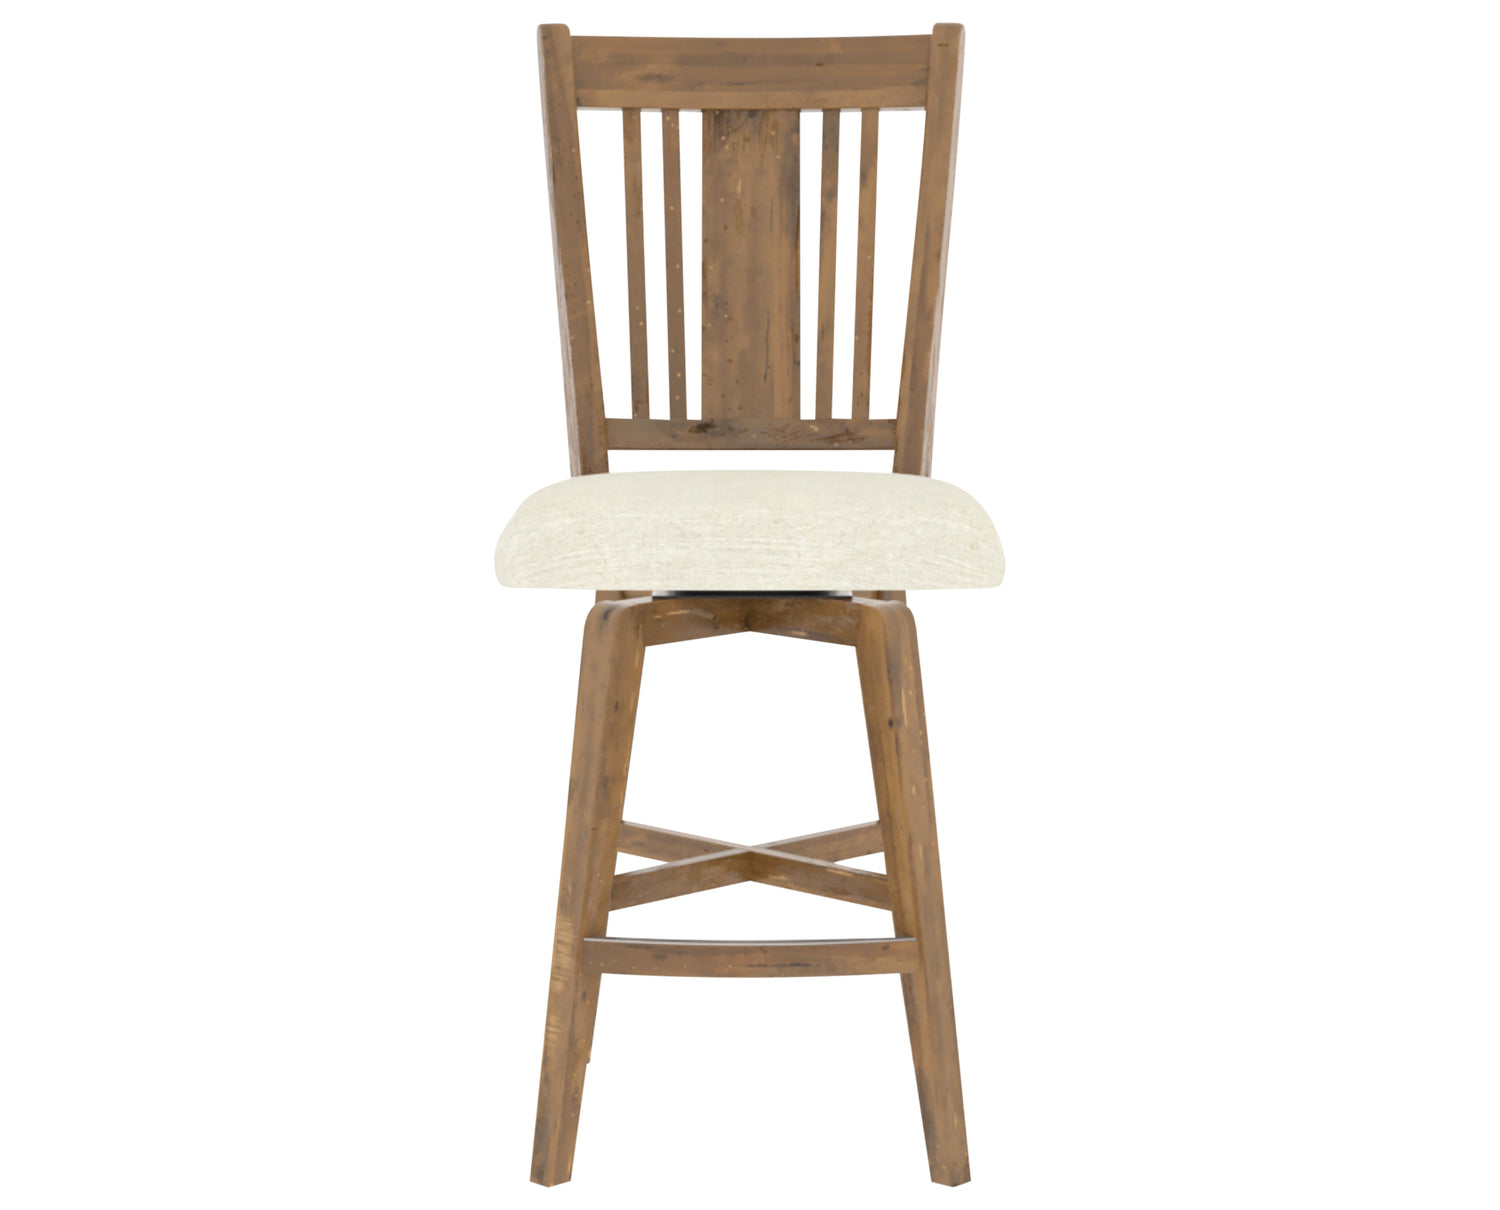 Oak Washed & Fabric TW | Canadel Champlain Counter Stool 7250 | Valley Ridge Furniture